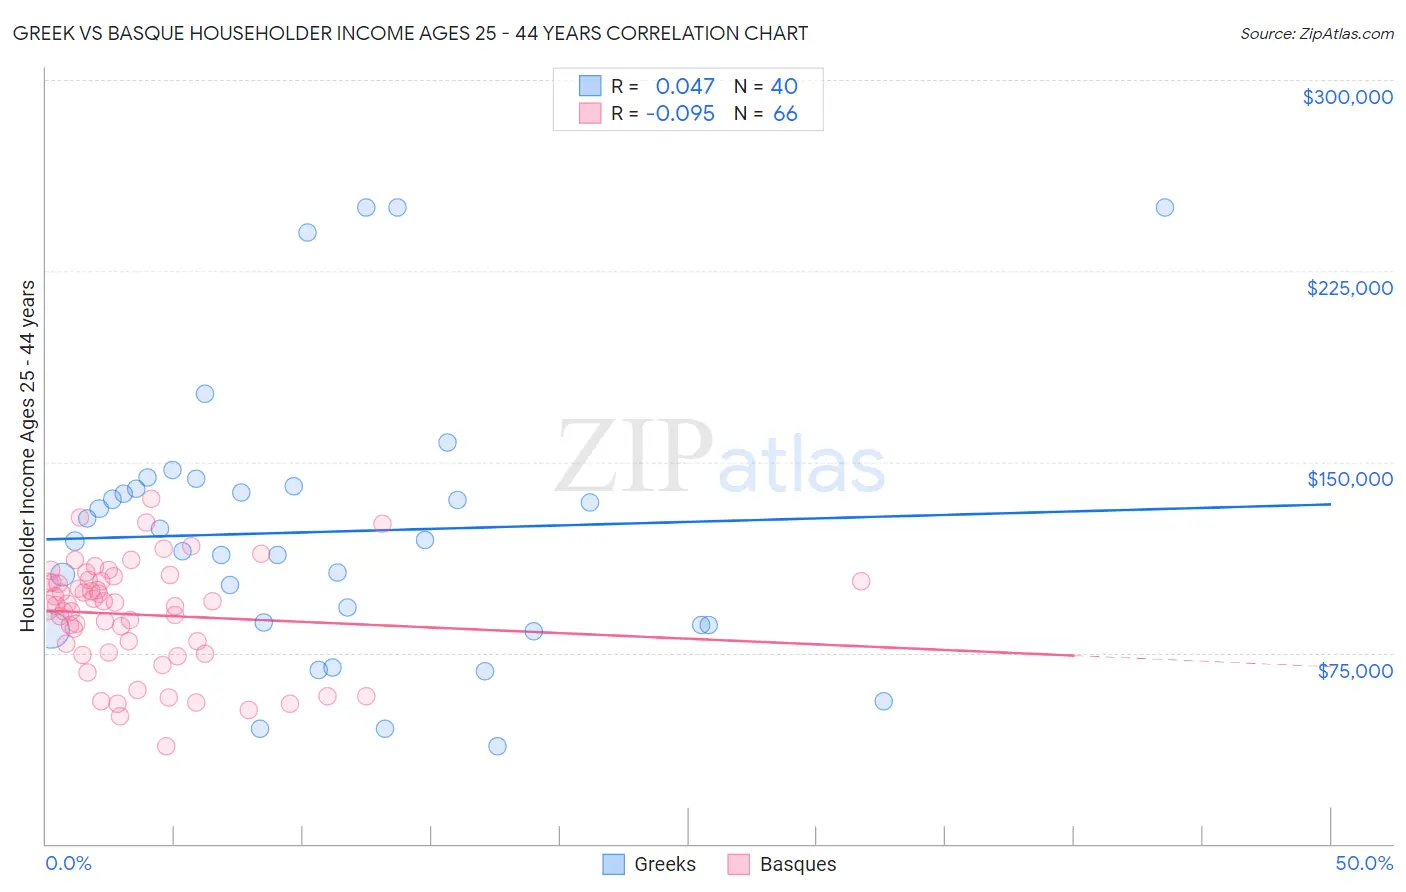 Greek vs Basque Householder Income Ages 25 - 44 years